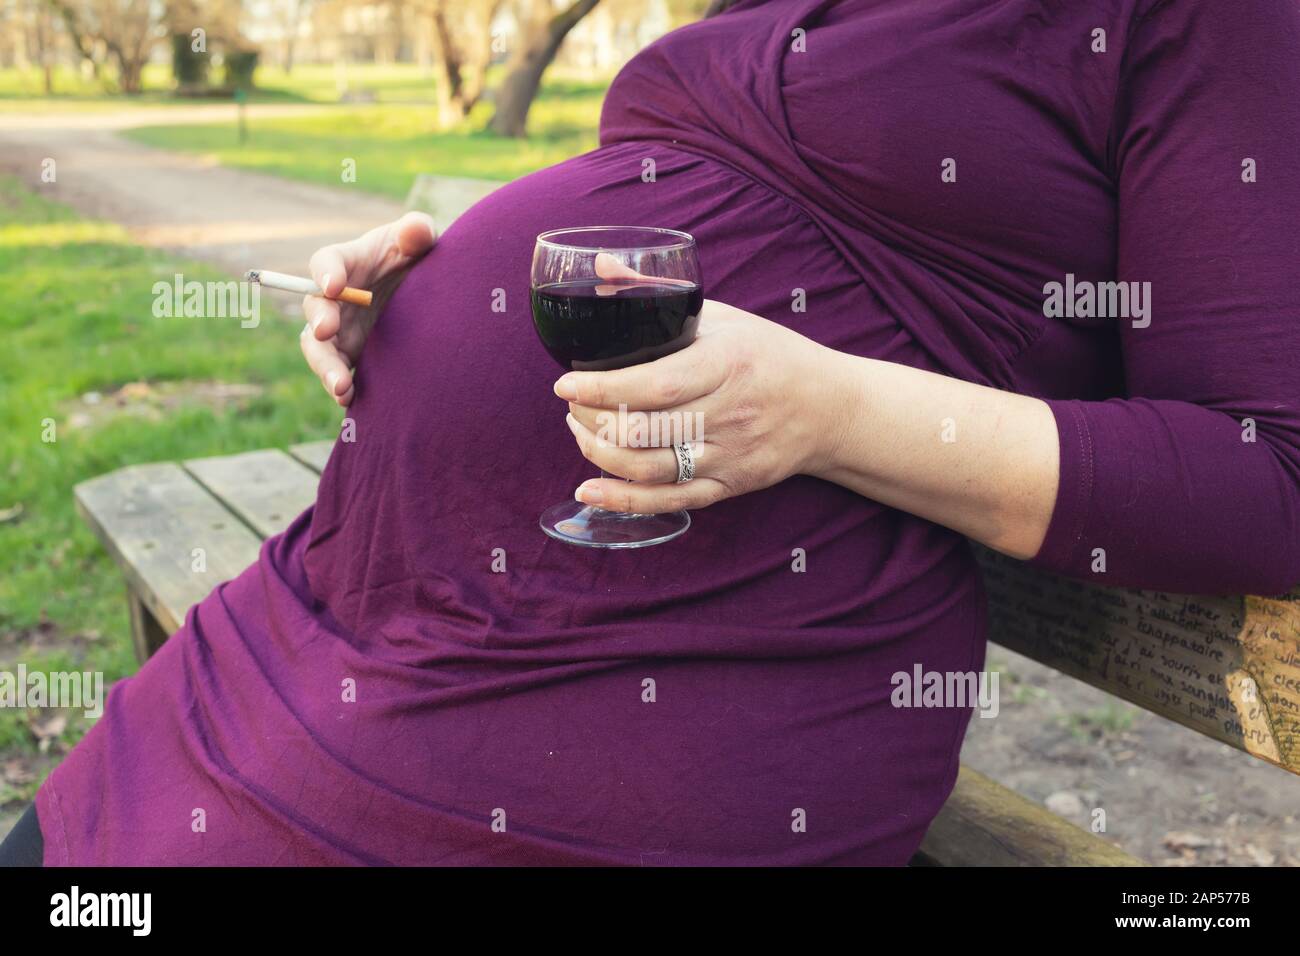 Pregnant woman sitting on a bench, drinking red wine and smoking cigarette in a park. Stock Photo